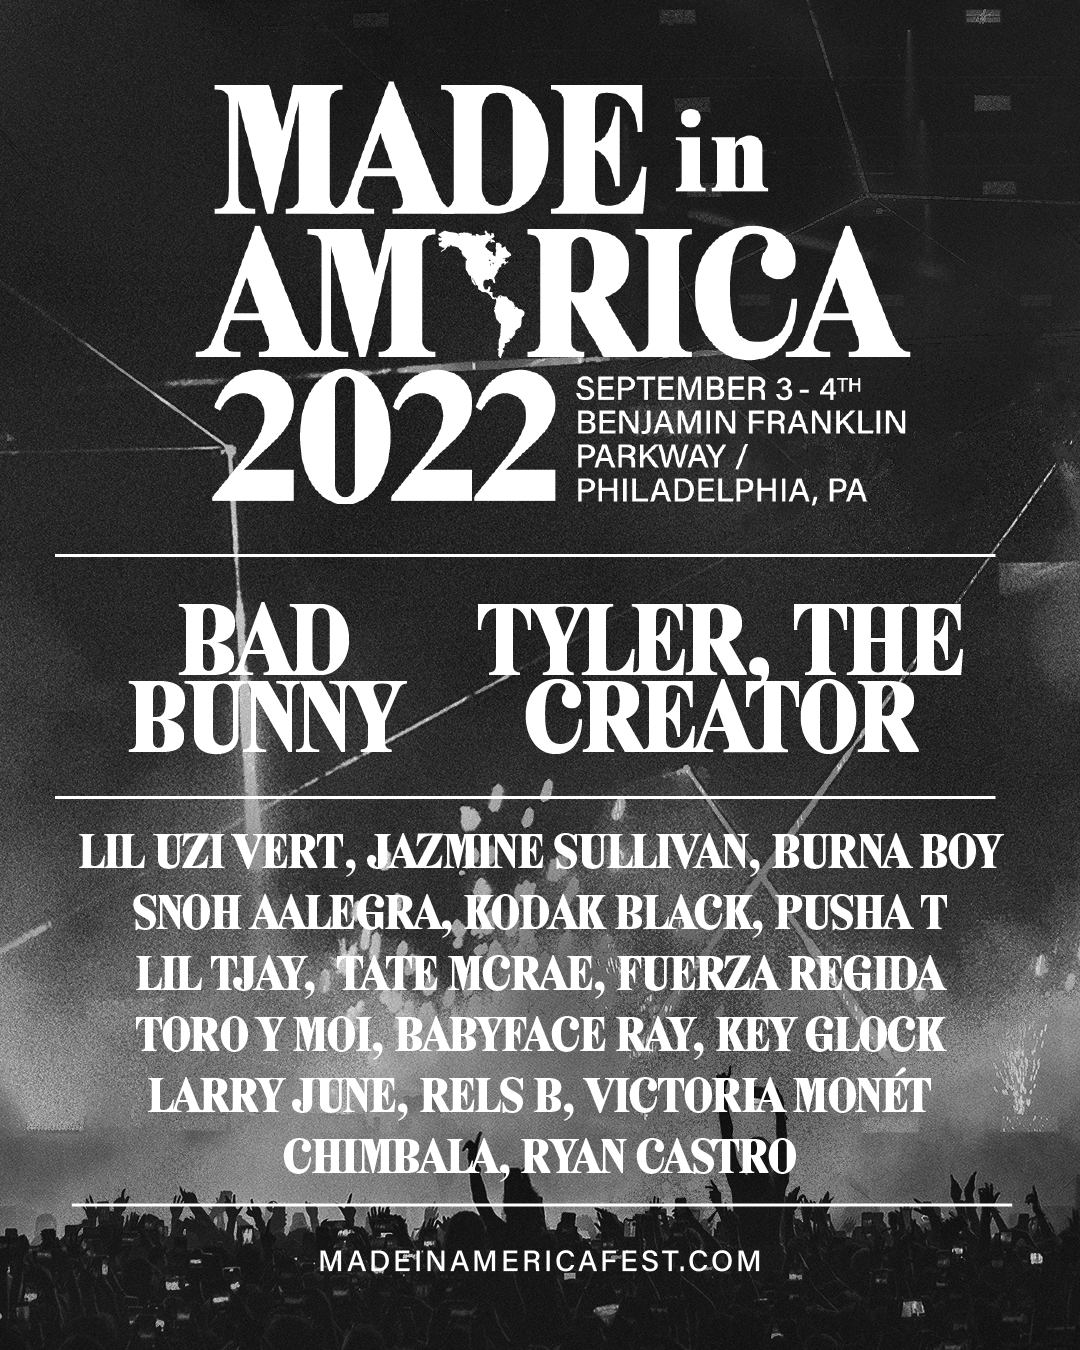 Made in America flyer is pictured